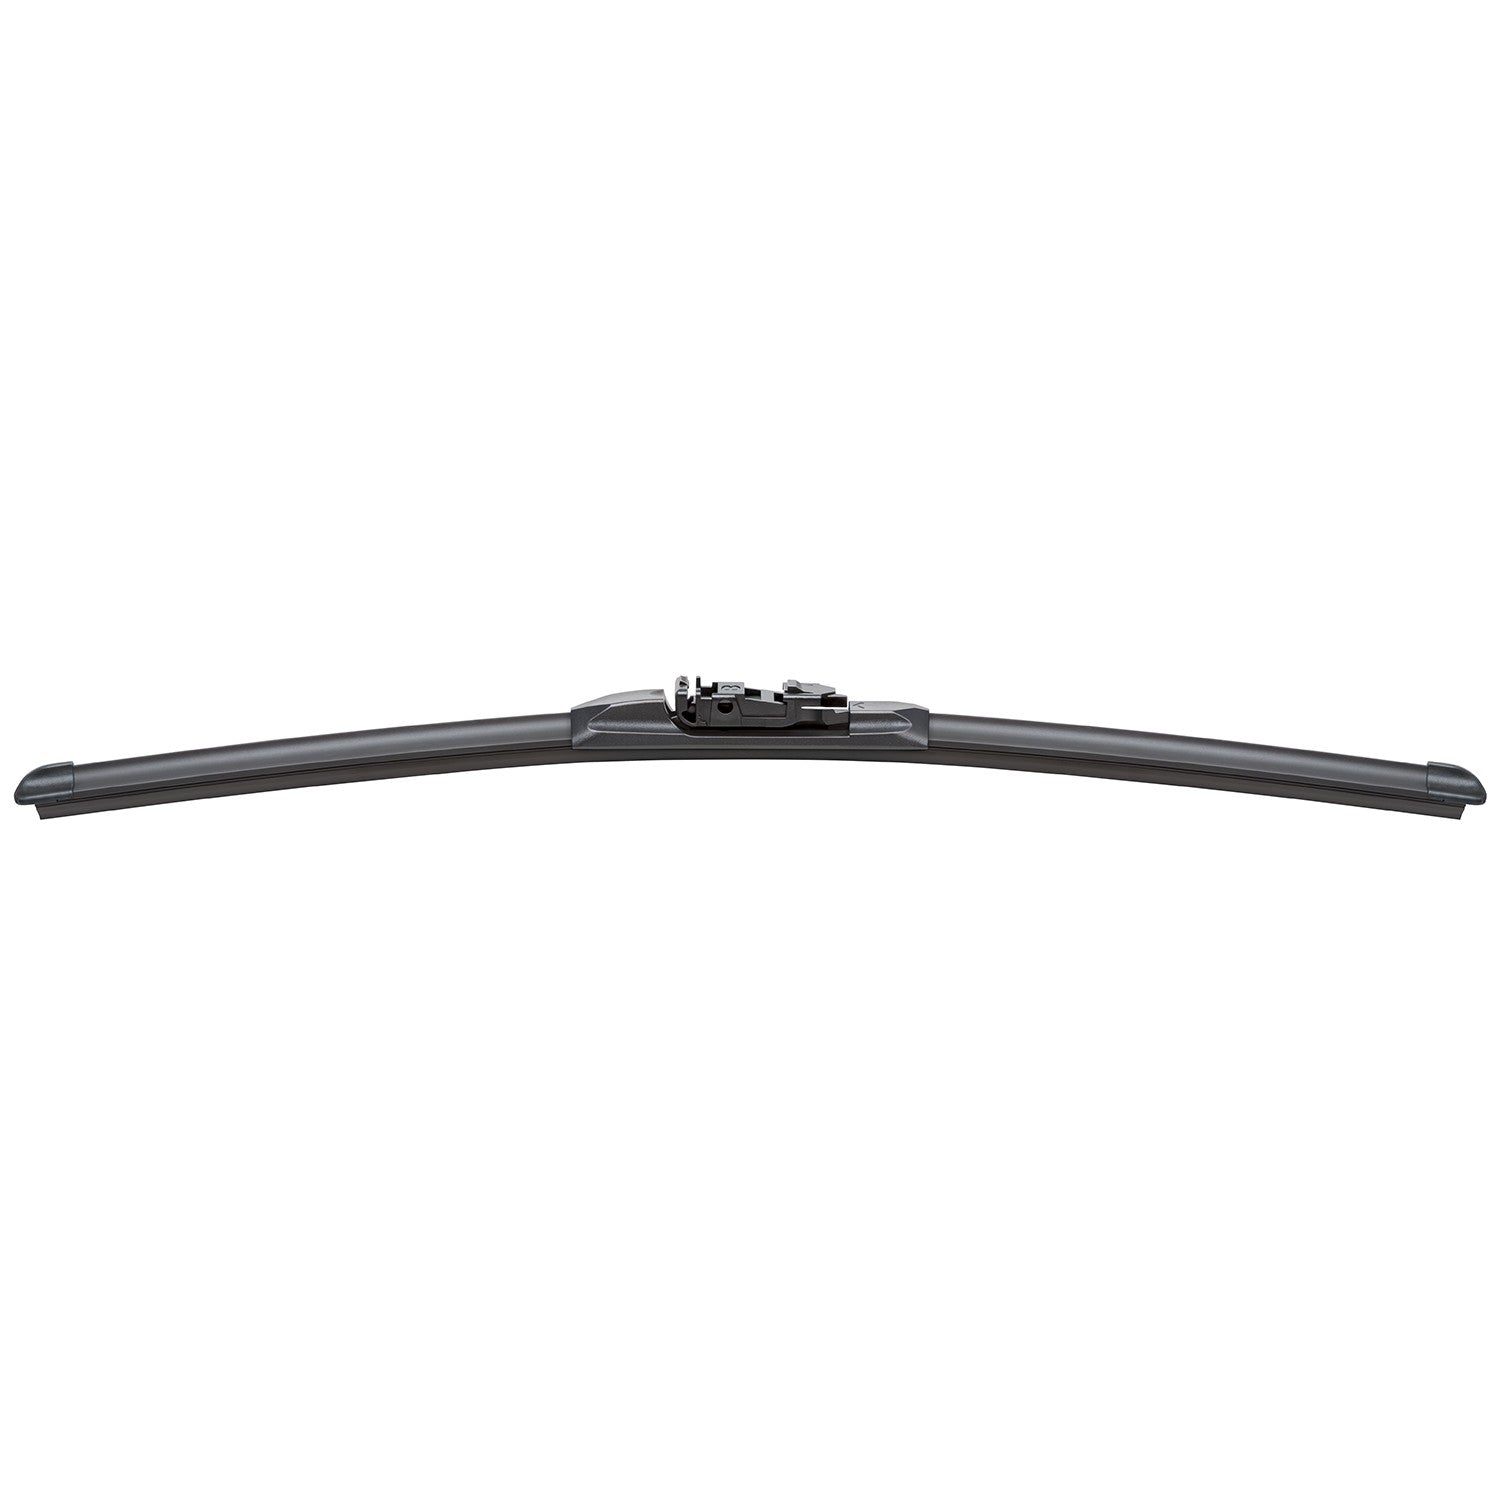 TRICO Exact Fit Windshield Wiper Blade  top view frsport 19-16B